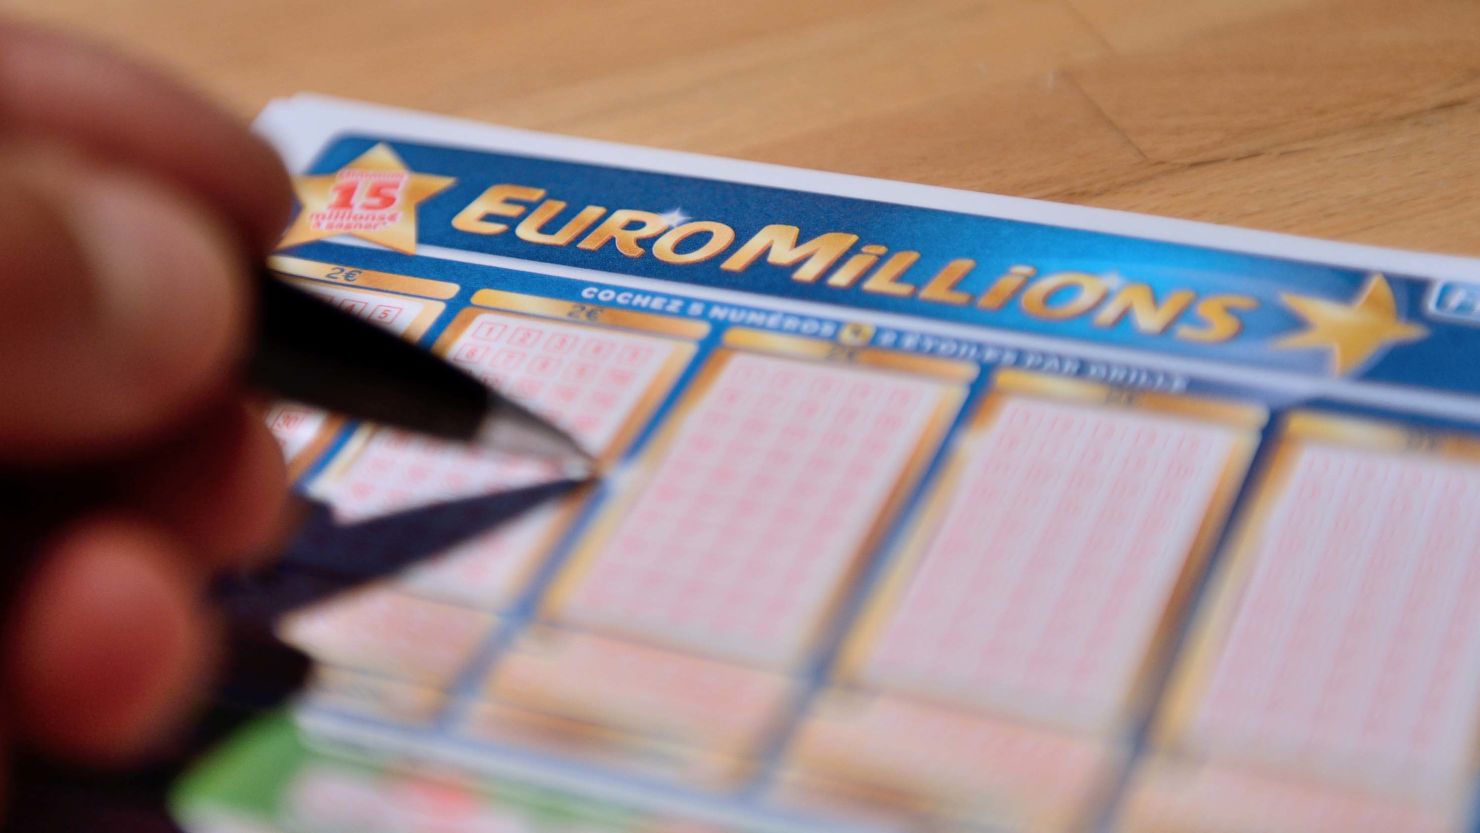 The search for the winner of the $97.5 million EuroMillions jackpot intensified after lottery organizers published the location where the winning ticket was bought. 